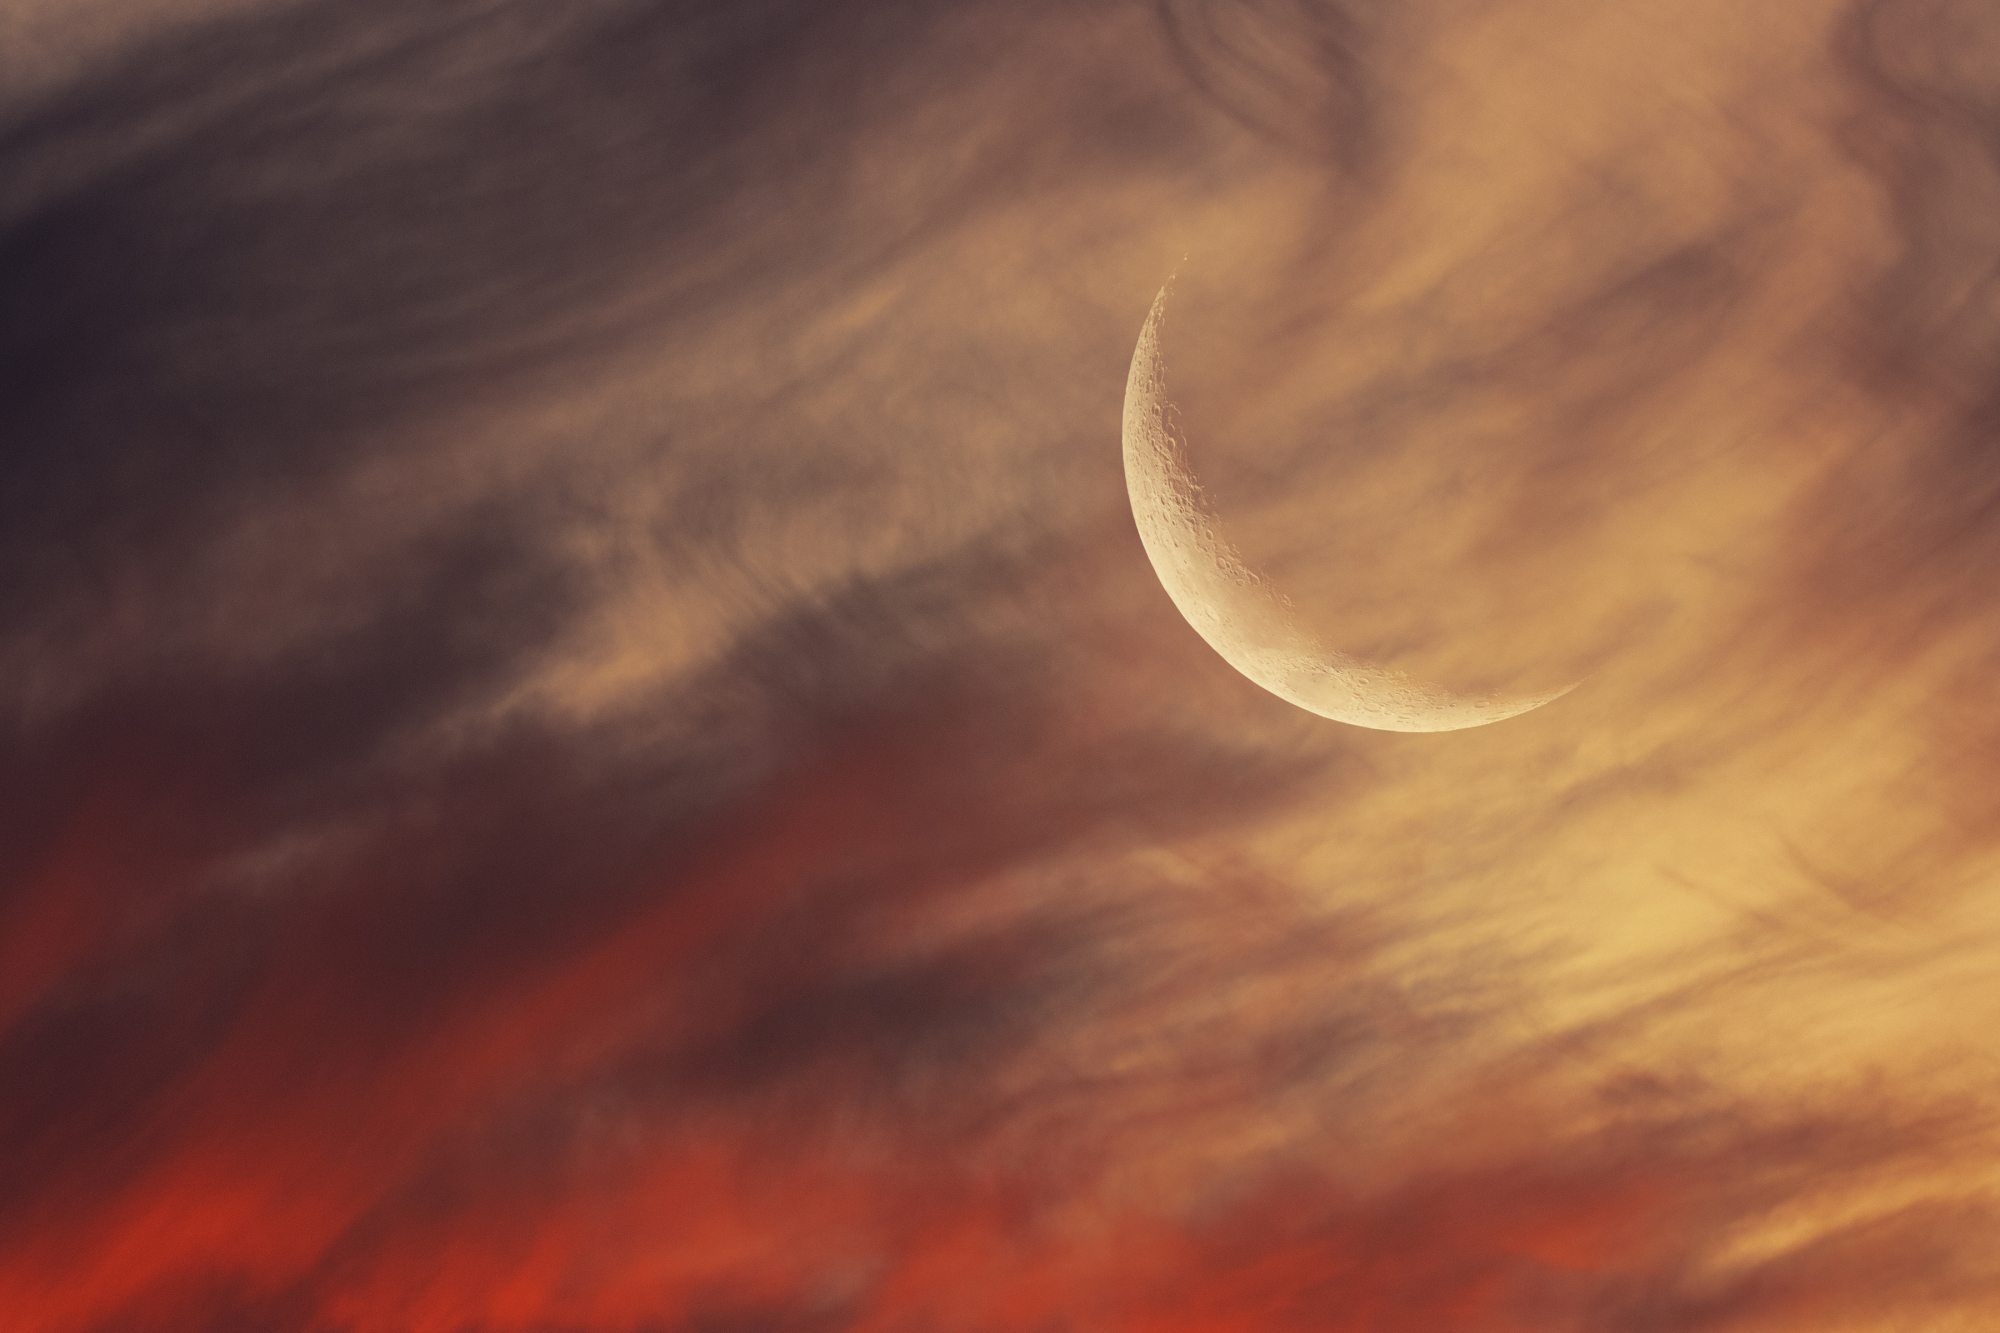 A crescent moon visible in a red and orange sky.